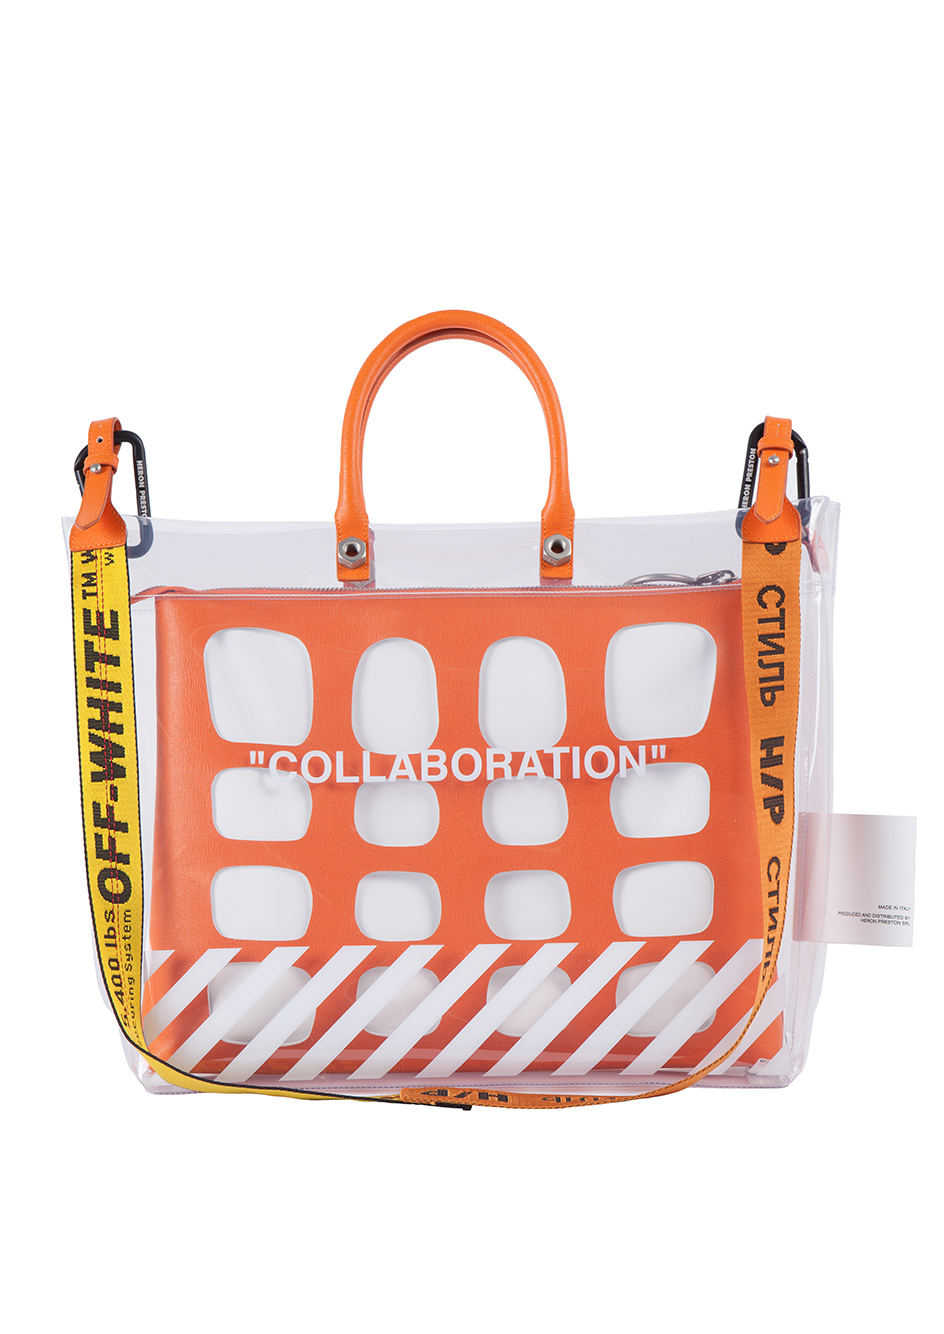 Off-White and Heron Preston Have Collaborated on A Unisex Bag 